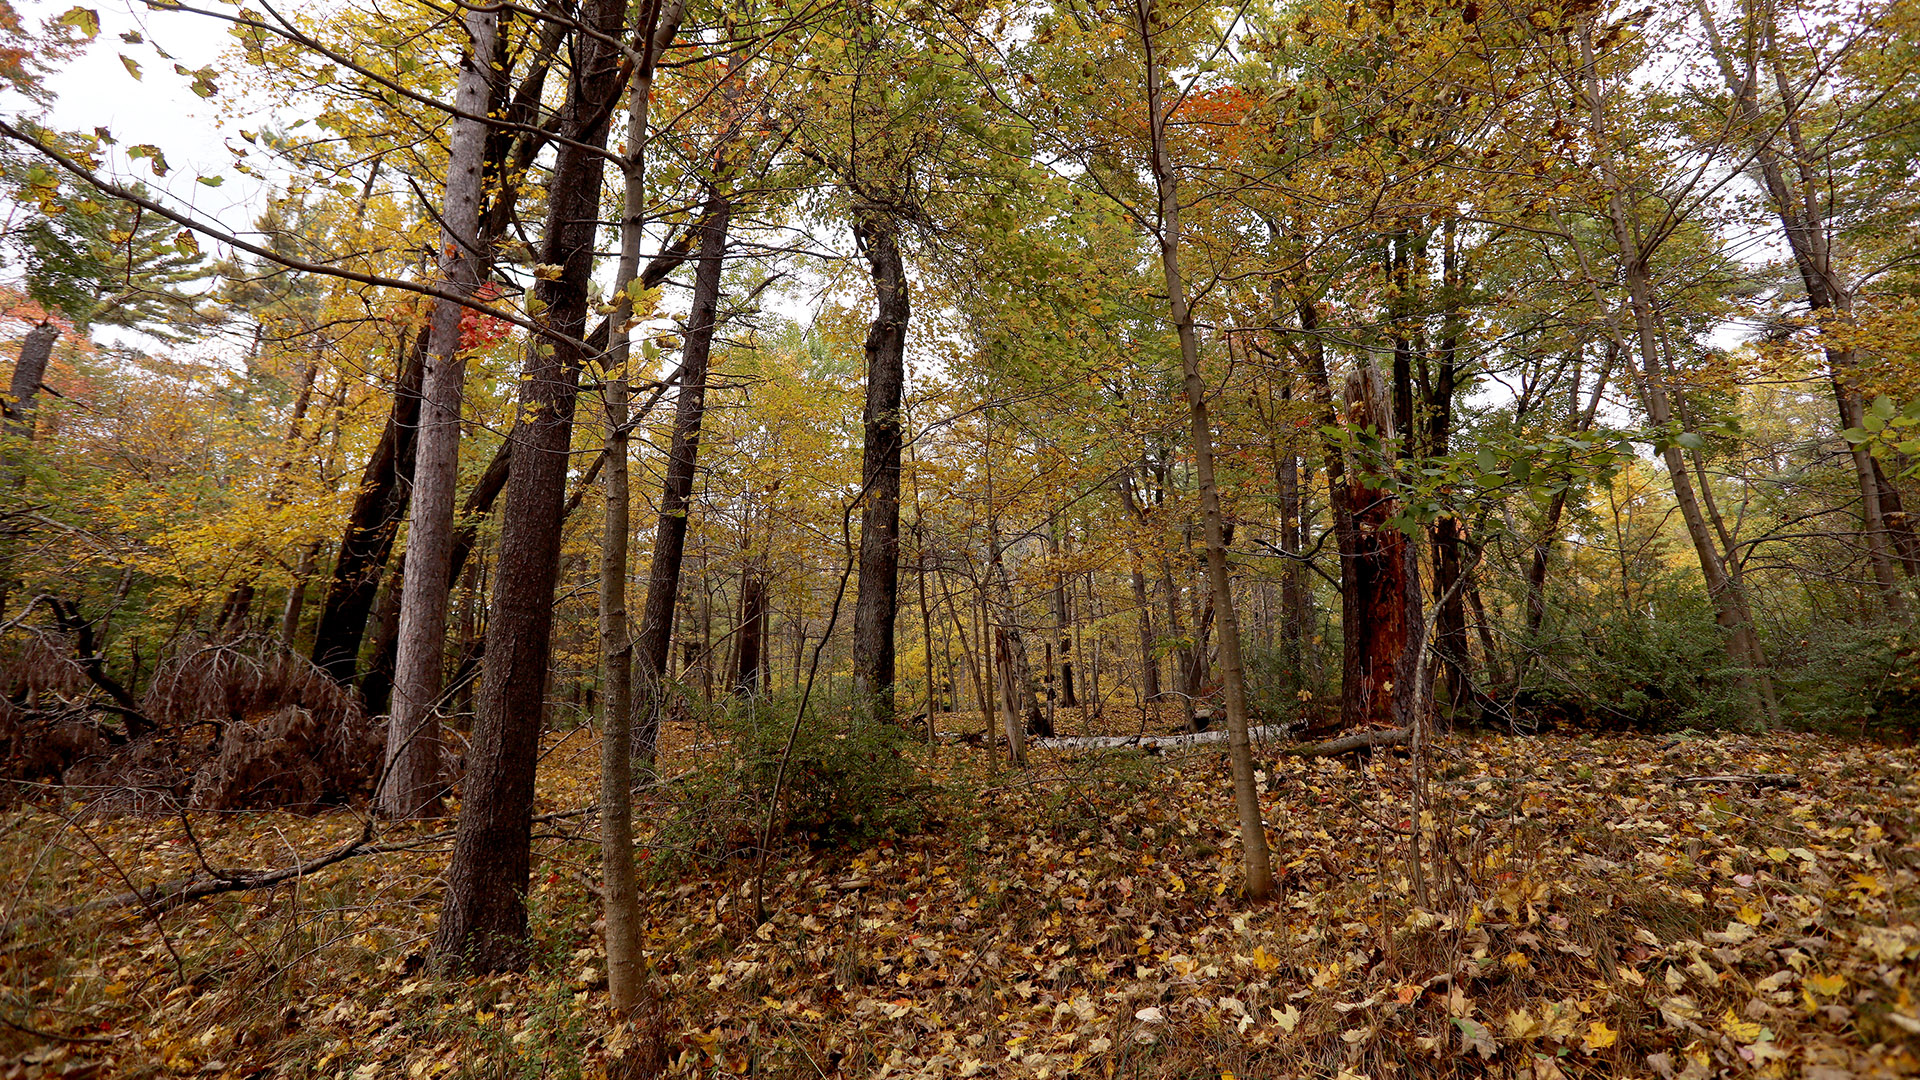 A canopy of trees with multiple colors of leaves on their branches stand over a leaf-covered forest floor, with low foliage near some trunks.